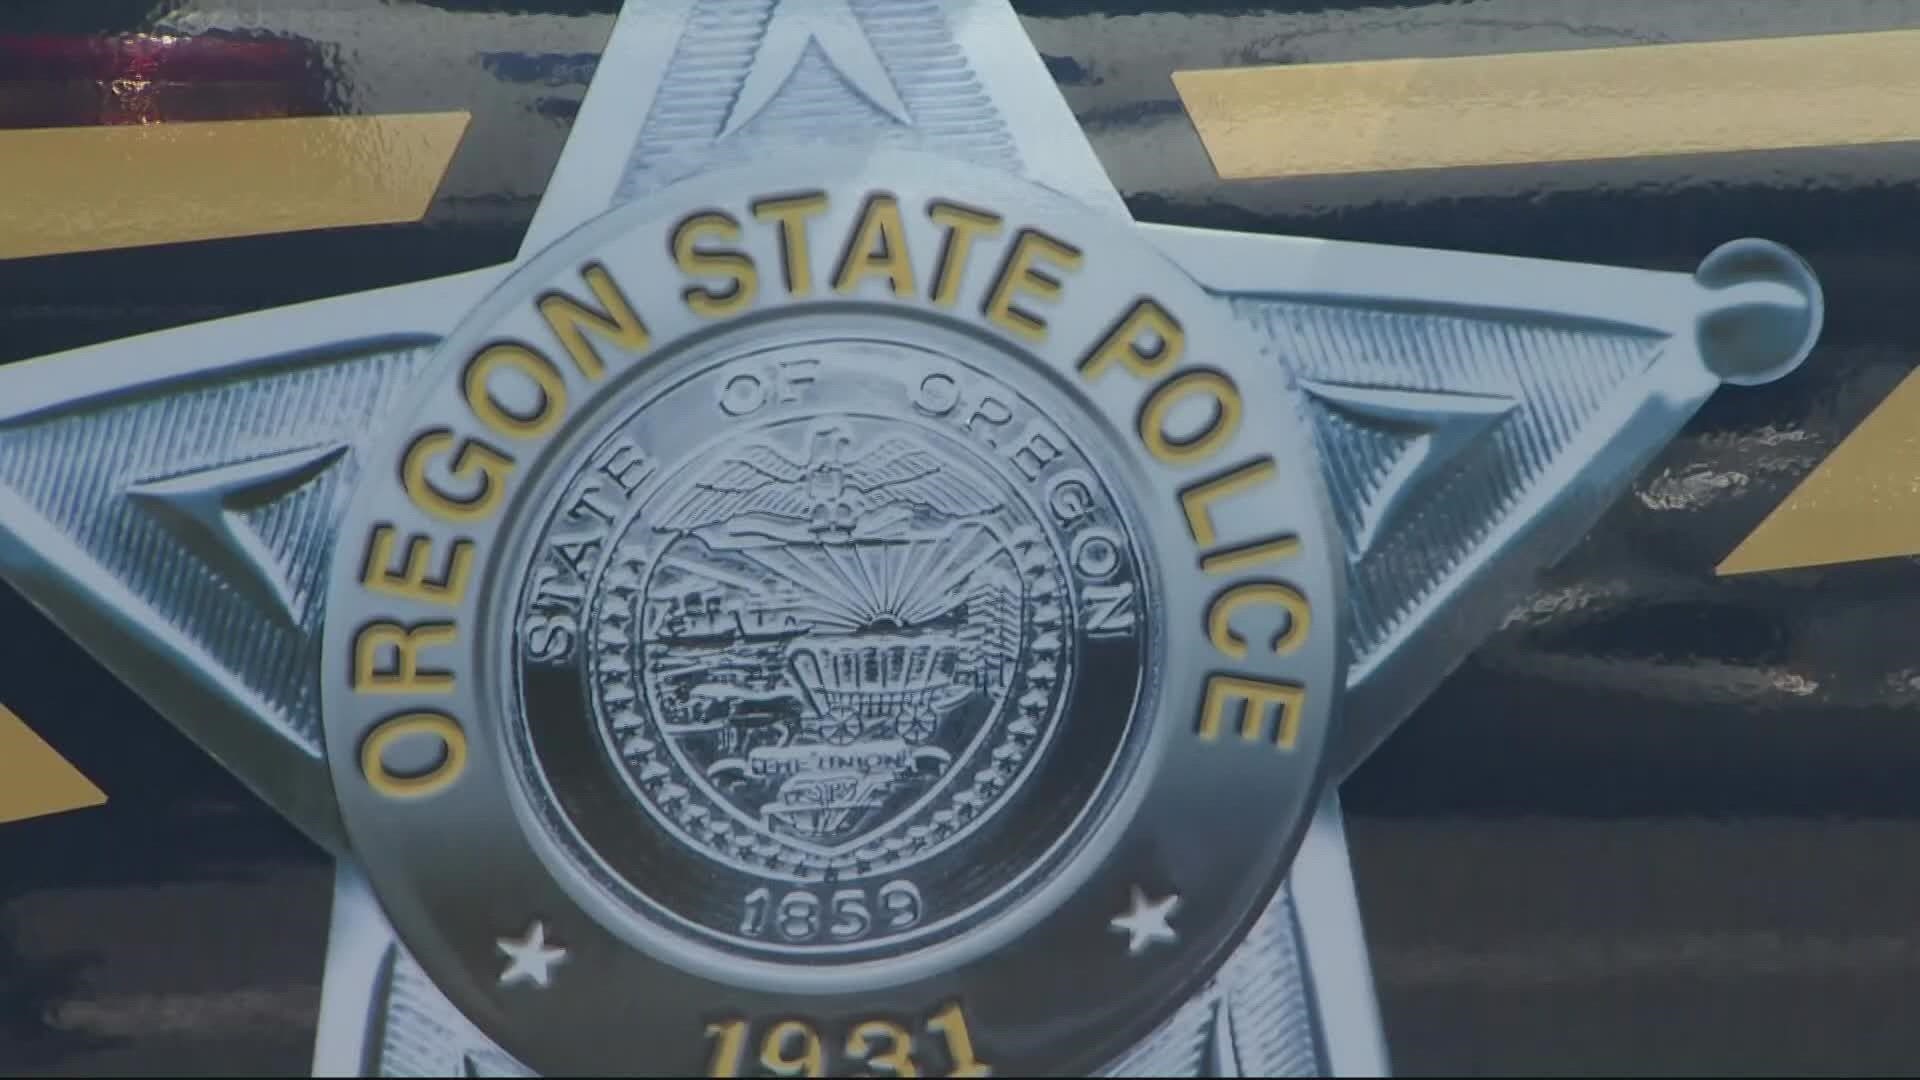 Dozens of firefighters and state troopers have filed a lawsuit against Oregon and Gov. Brown over the requirement that they get vaccinated against COVID-19 or lose t